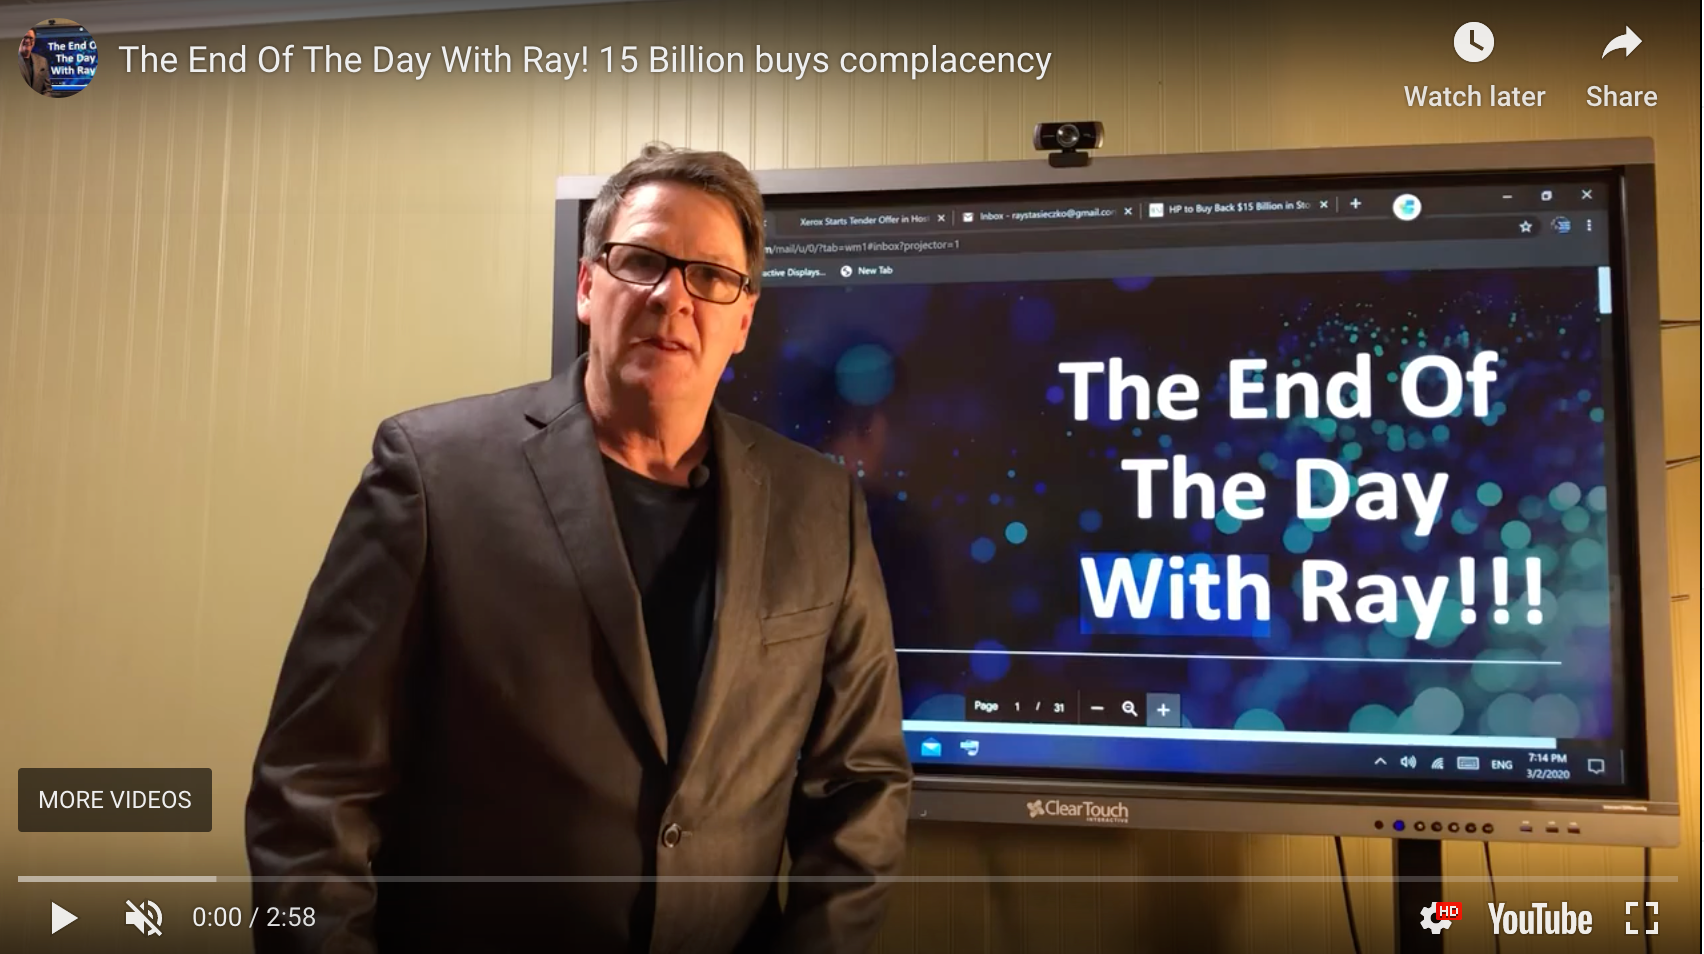 The End Of The Day With Ray! 15 Billion buys complacency